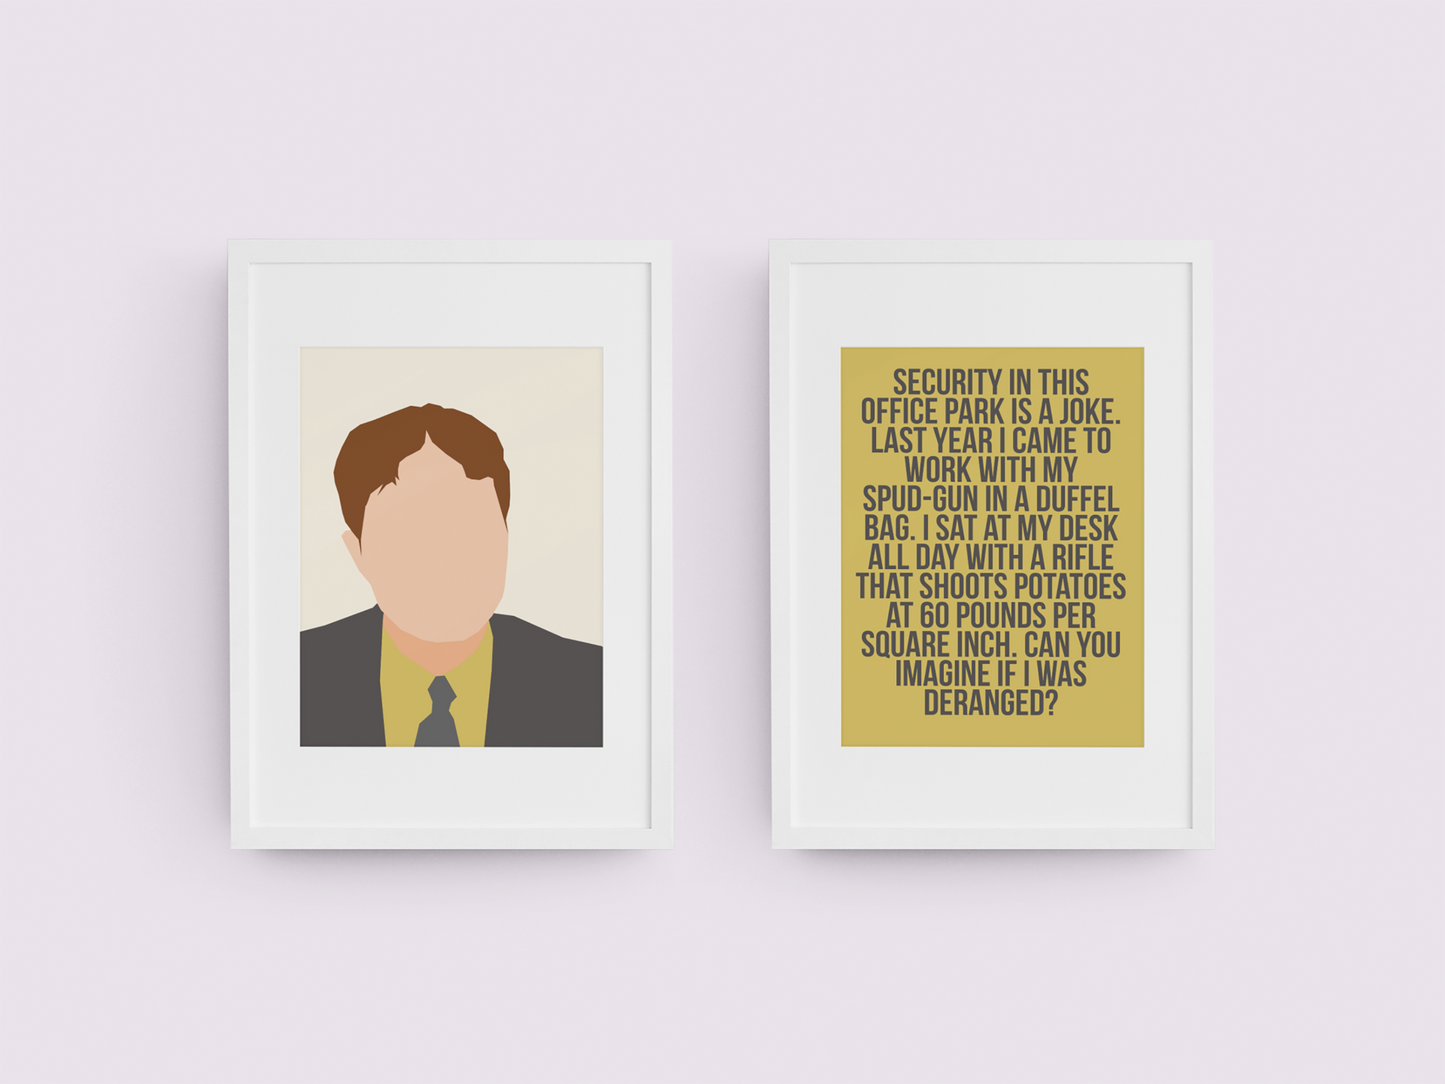 The Office Dwight Schrute artwork and funny quote featuring security in The Office